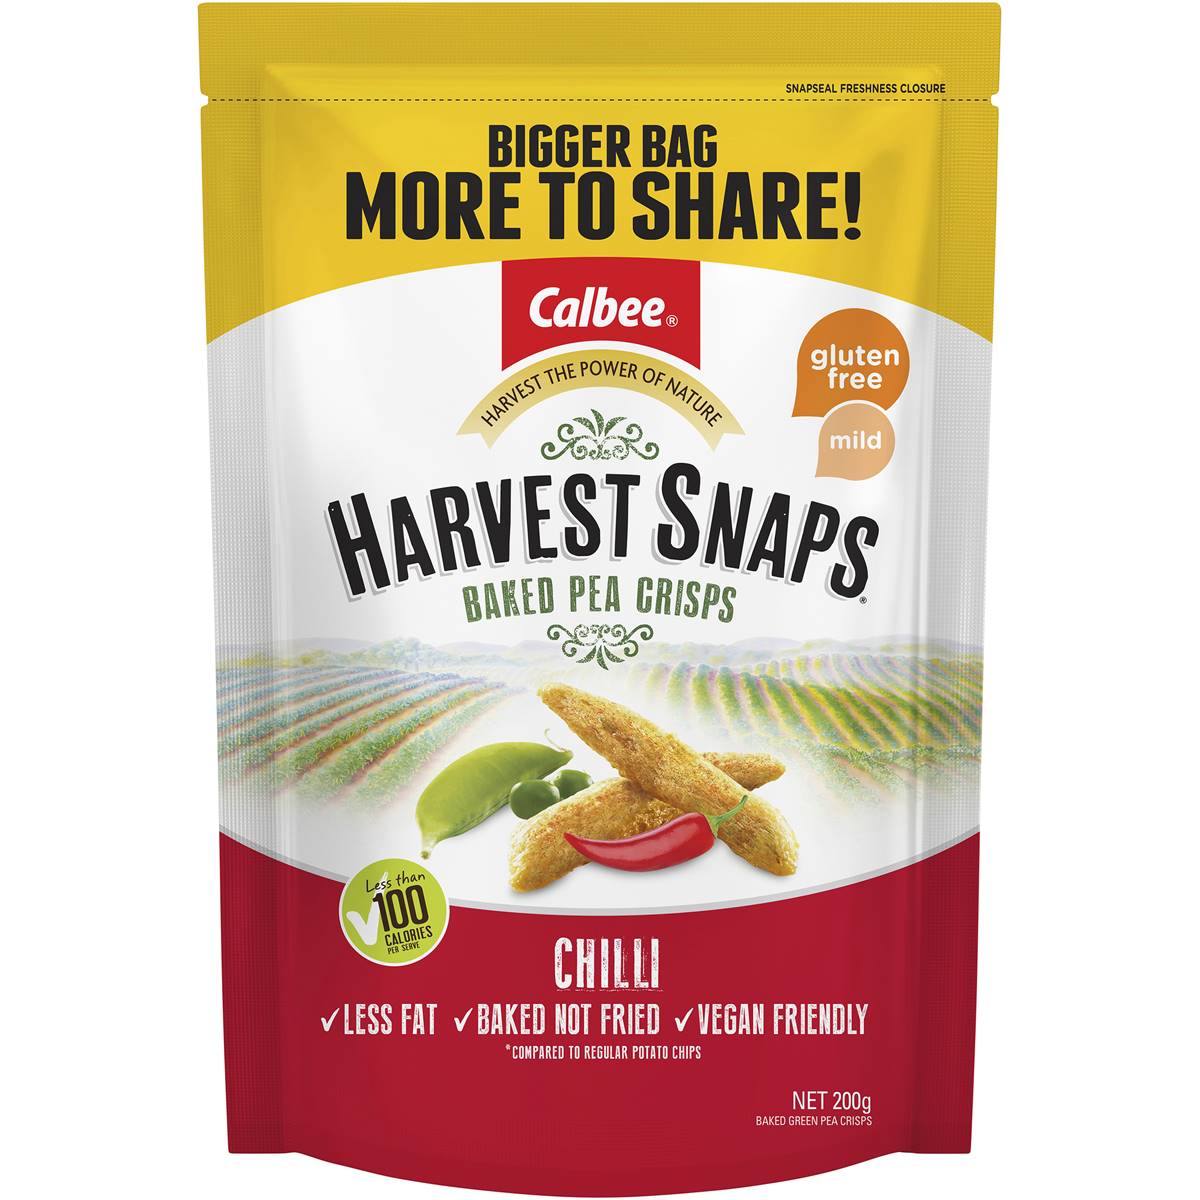 Calories in Calbee Harvest Snaps Chilli Baked Pea Crisps